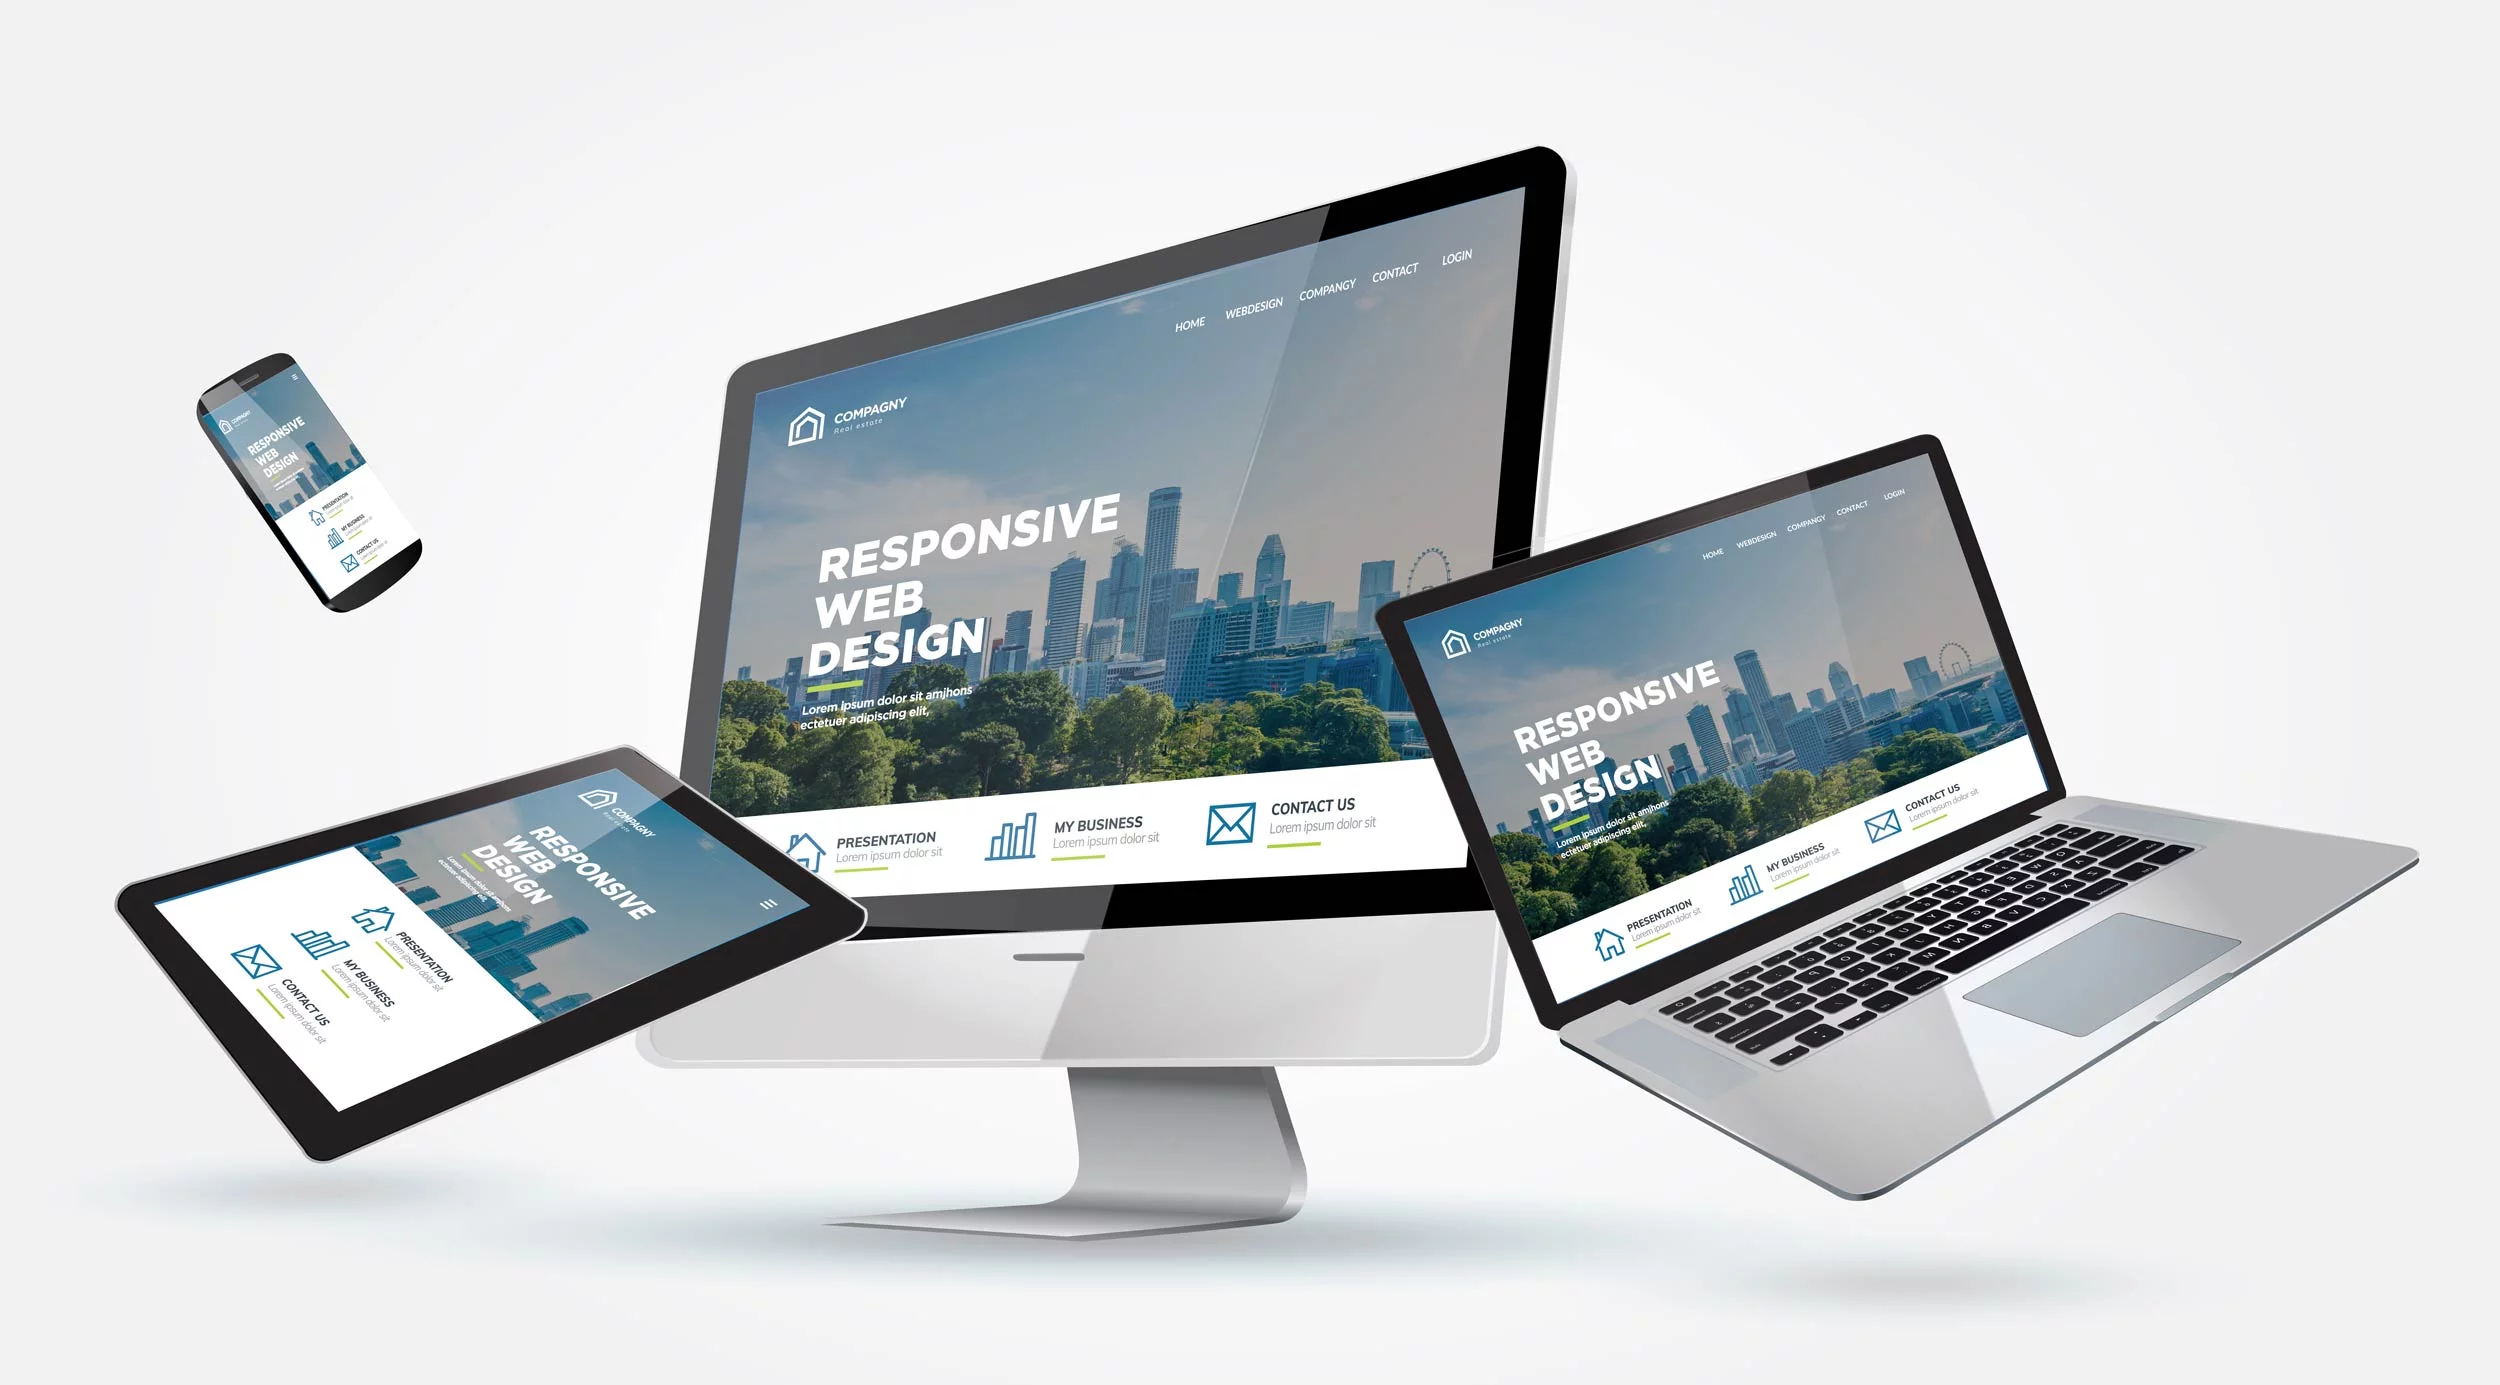 Concept showing Responsive Web Design across multiple devices, Portsmouth at Jazz Creative